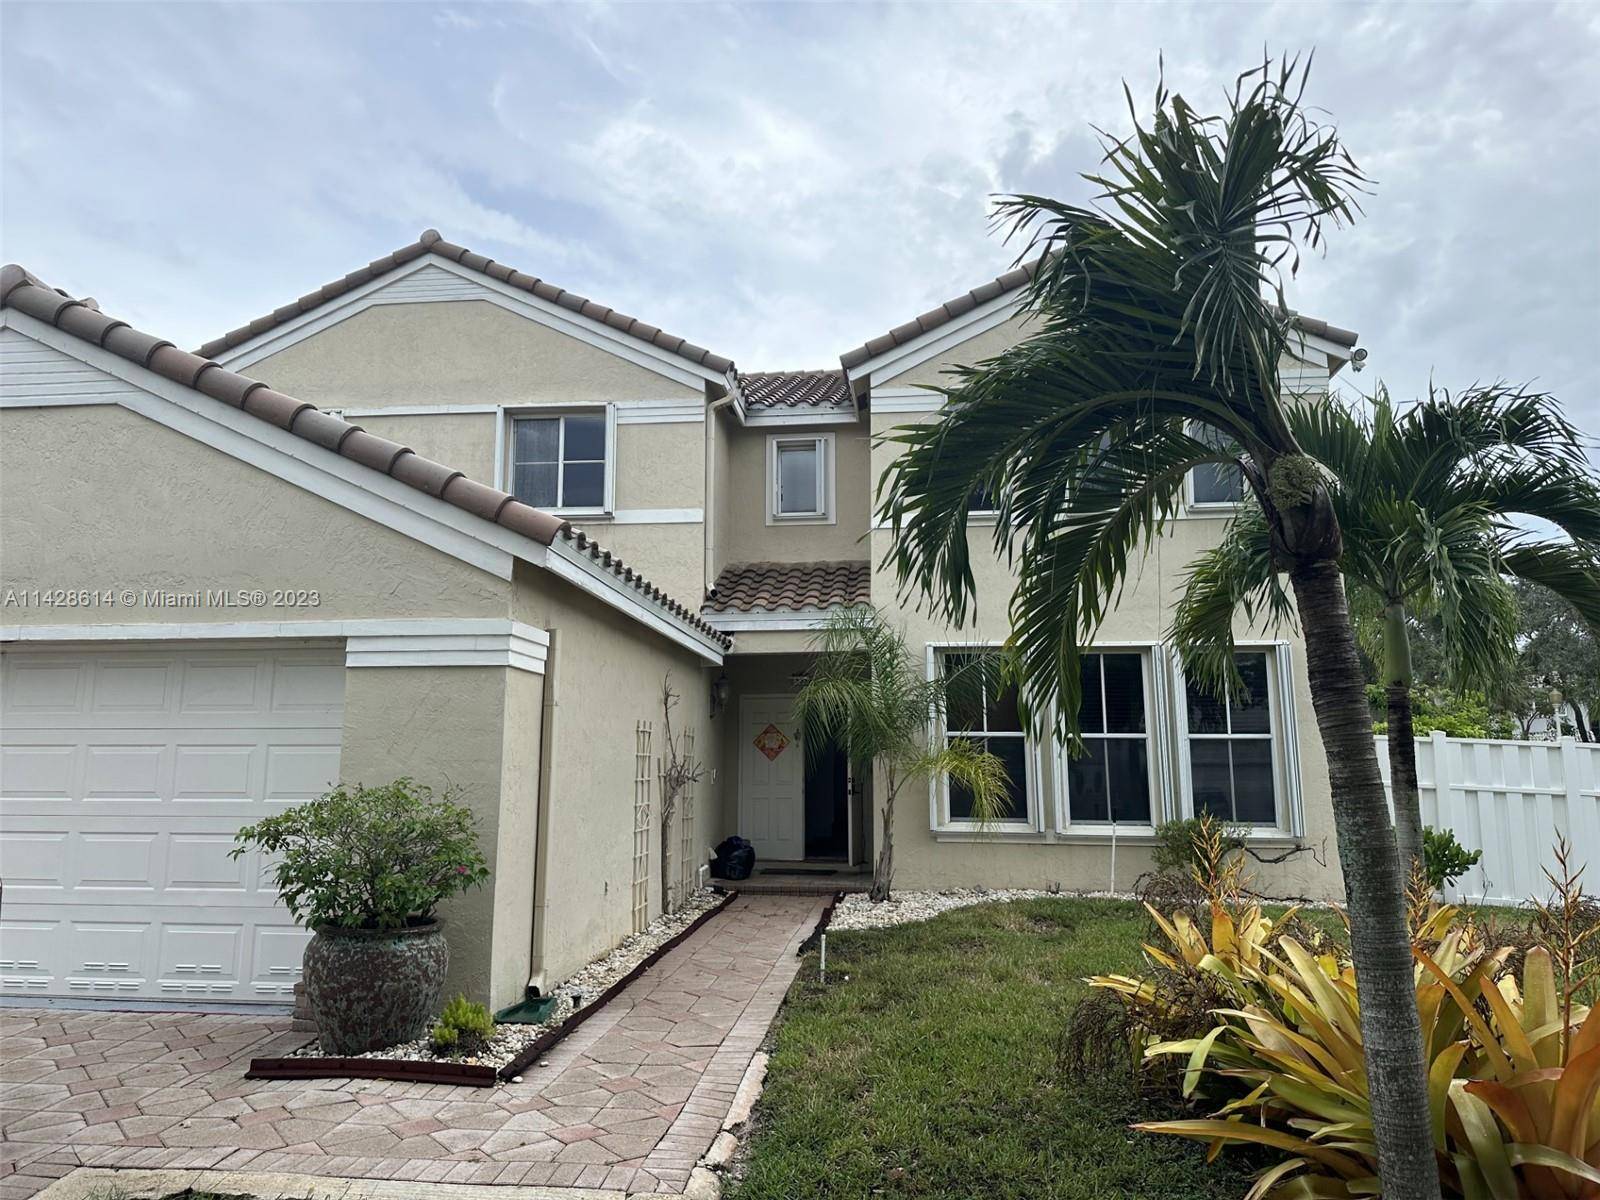 BEAUTIFUL HOME IN THE GATED COMMUNITY OF THE FALLS IN WESTON.